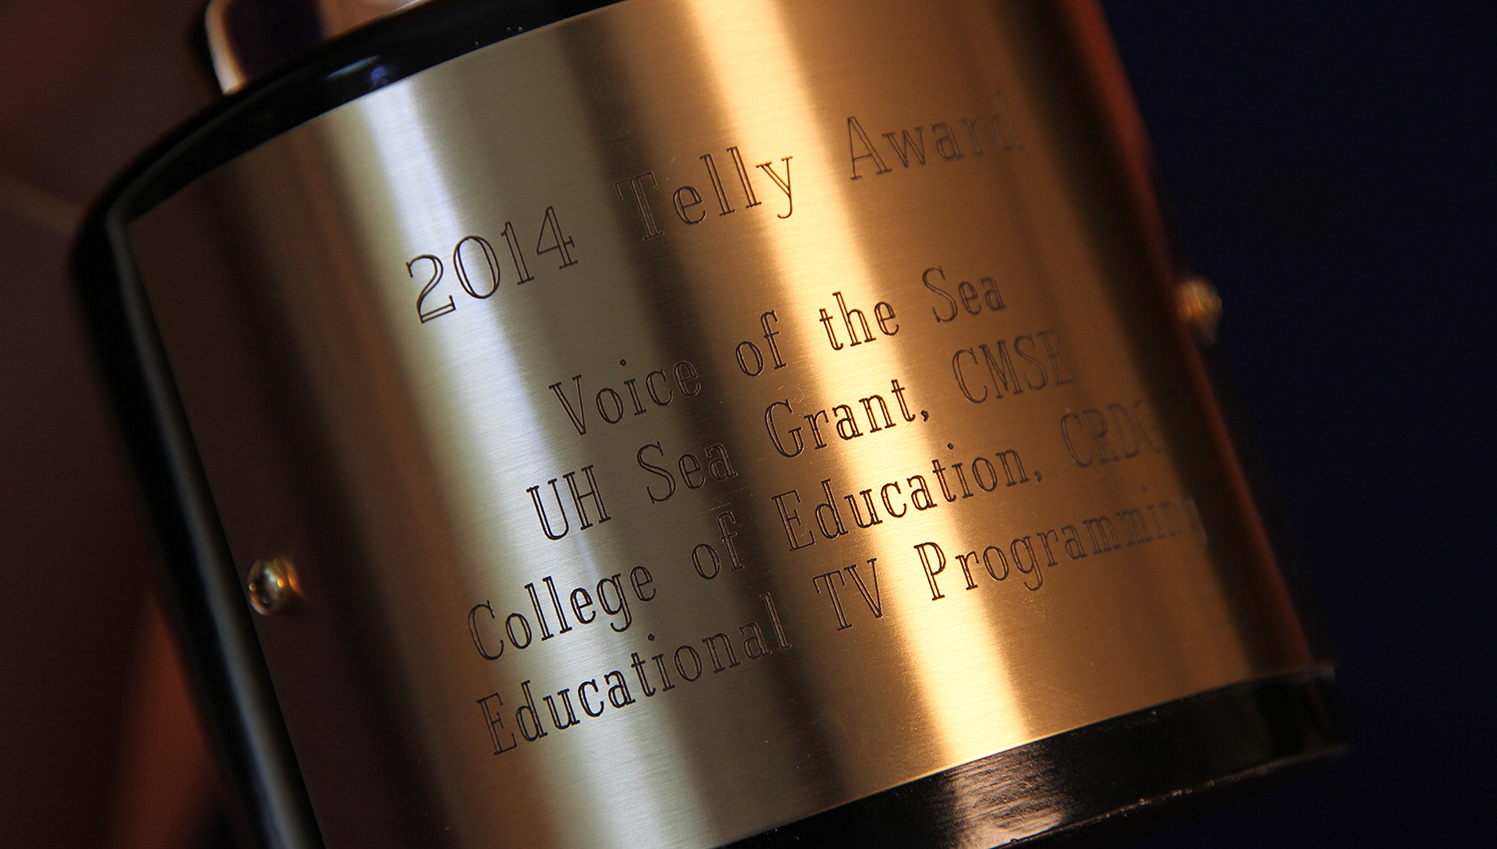 Close-up of Telly award for Voice of the Sea